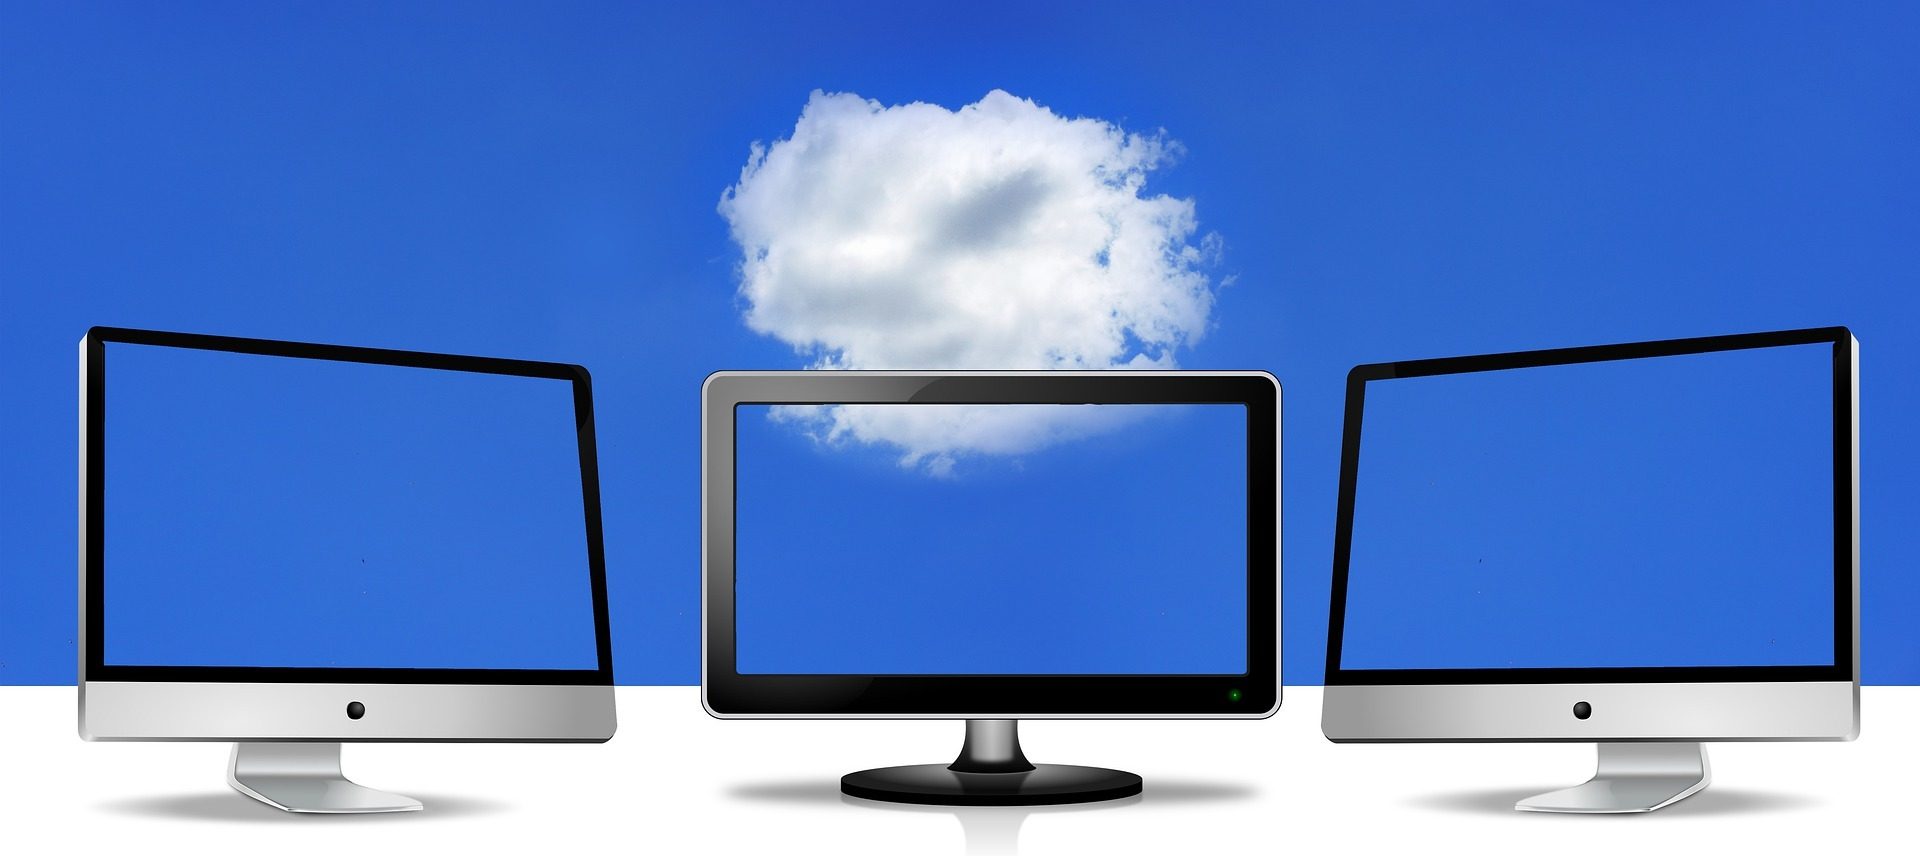 Flat panel display, Personal computer, Output device, Peripheral, Cloud, Sky